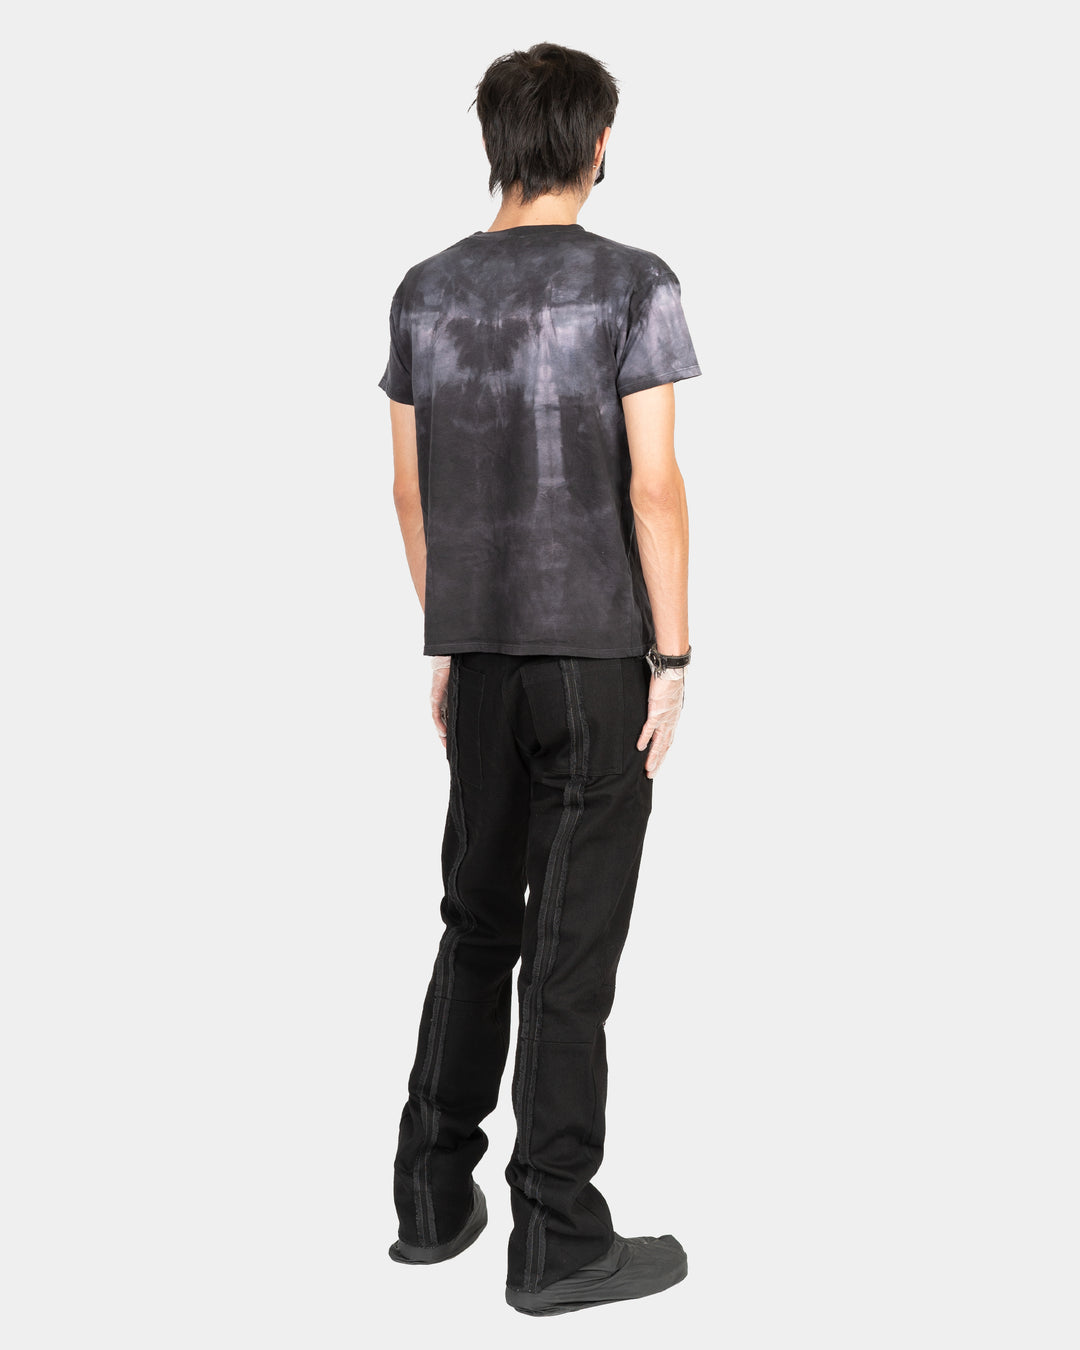 T-shirt in Hand Dyed Darkness